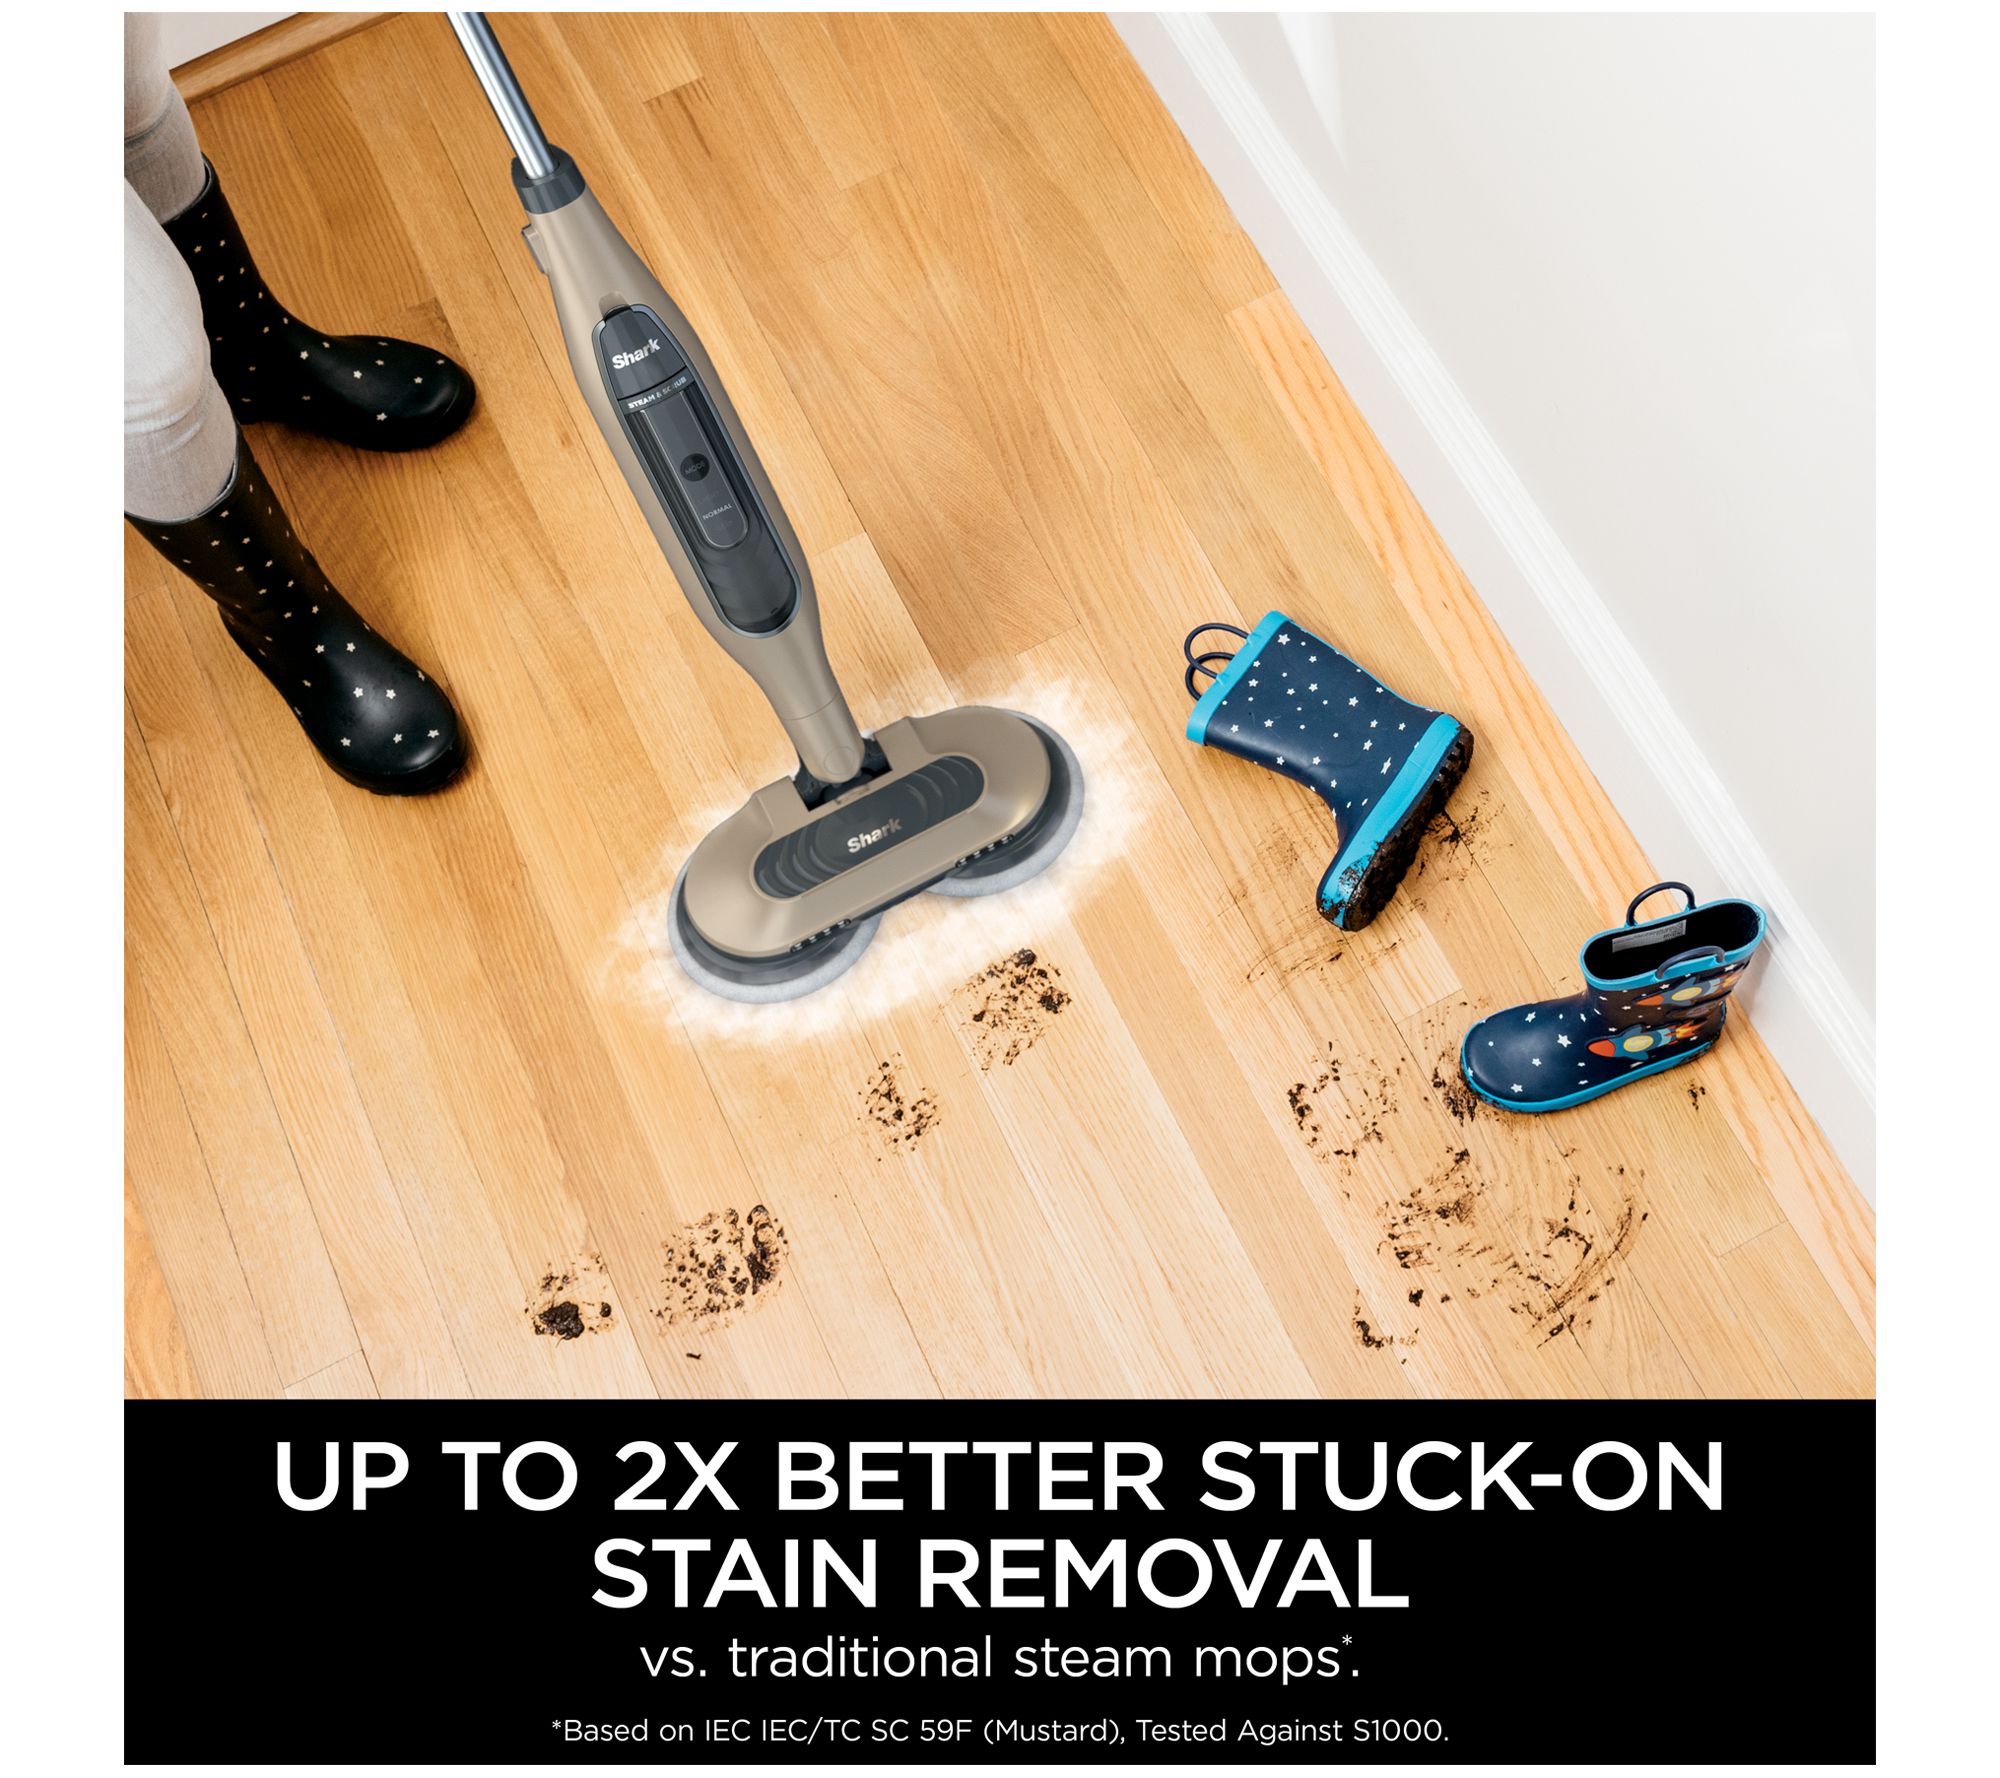 How to care for your Shark steam mop - Shark Cleaning Hacks